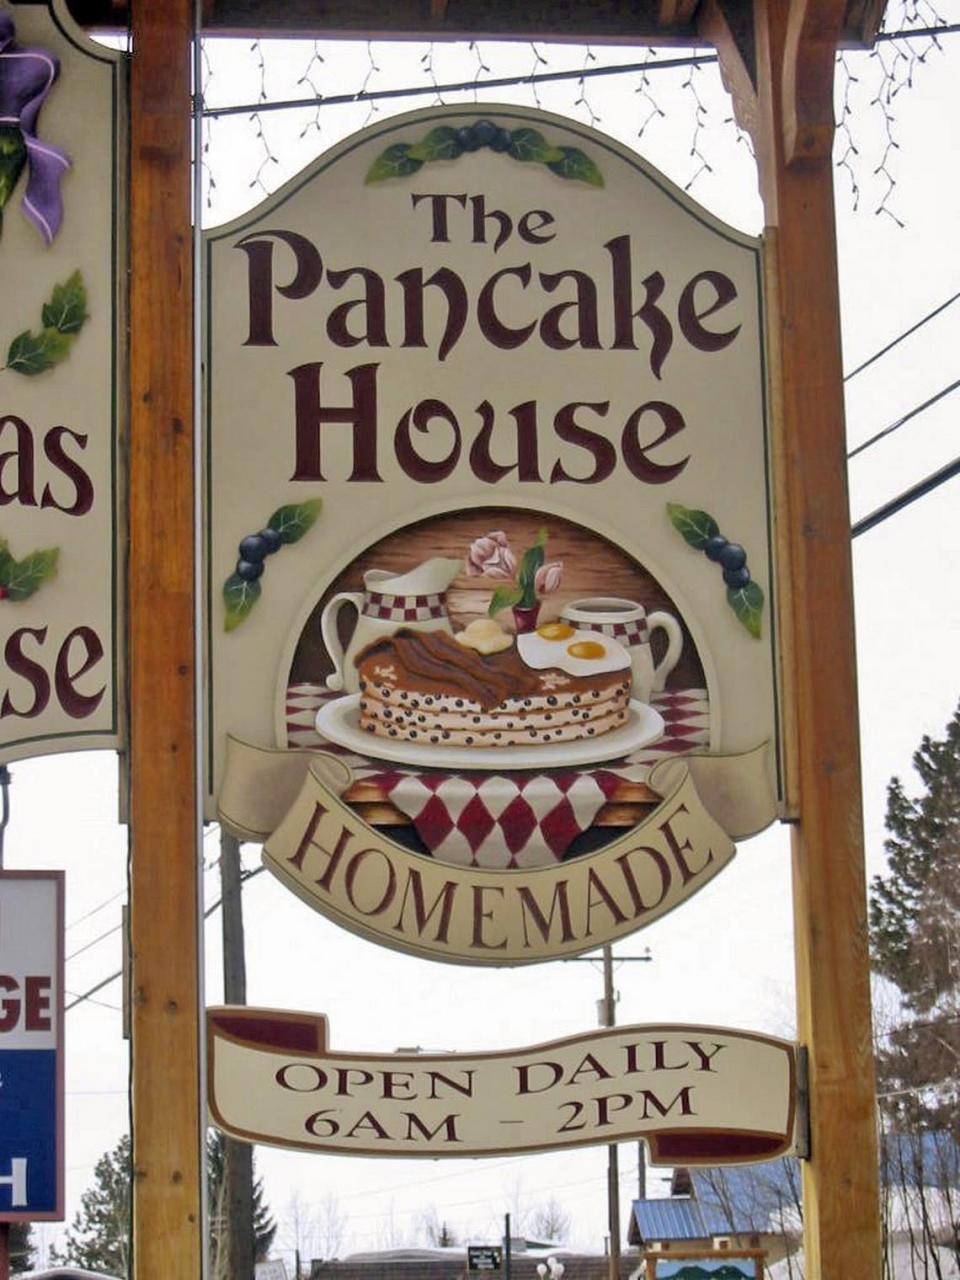 The Pancake House has in McCall has been a familiar sight for decades.